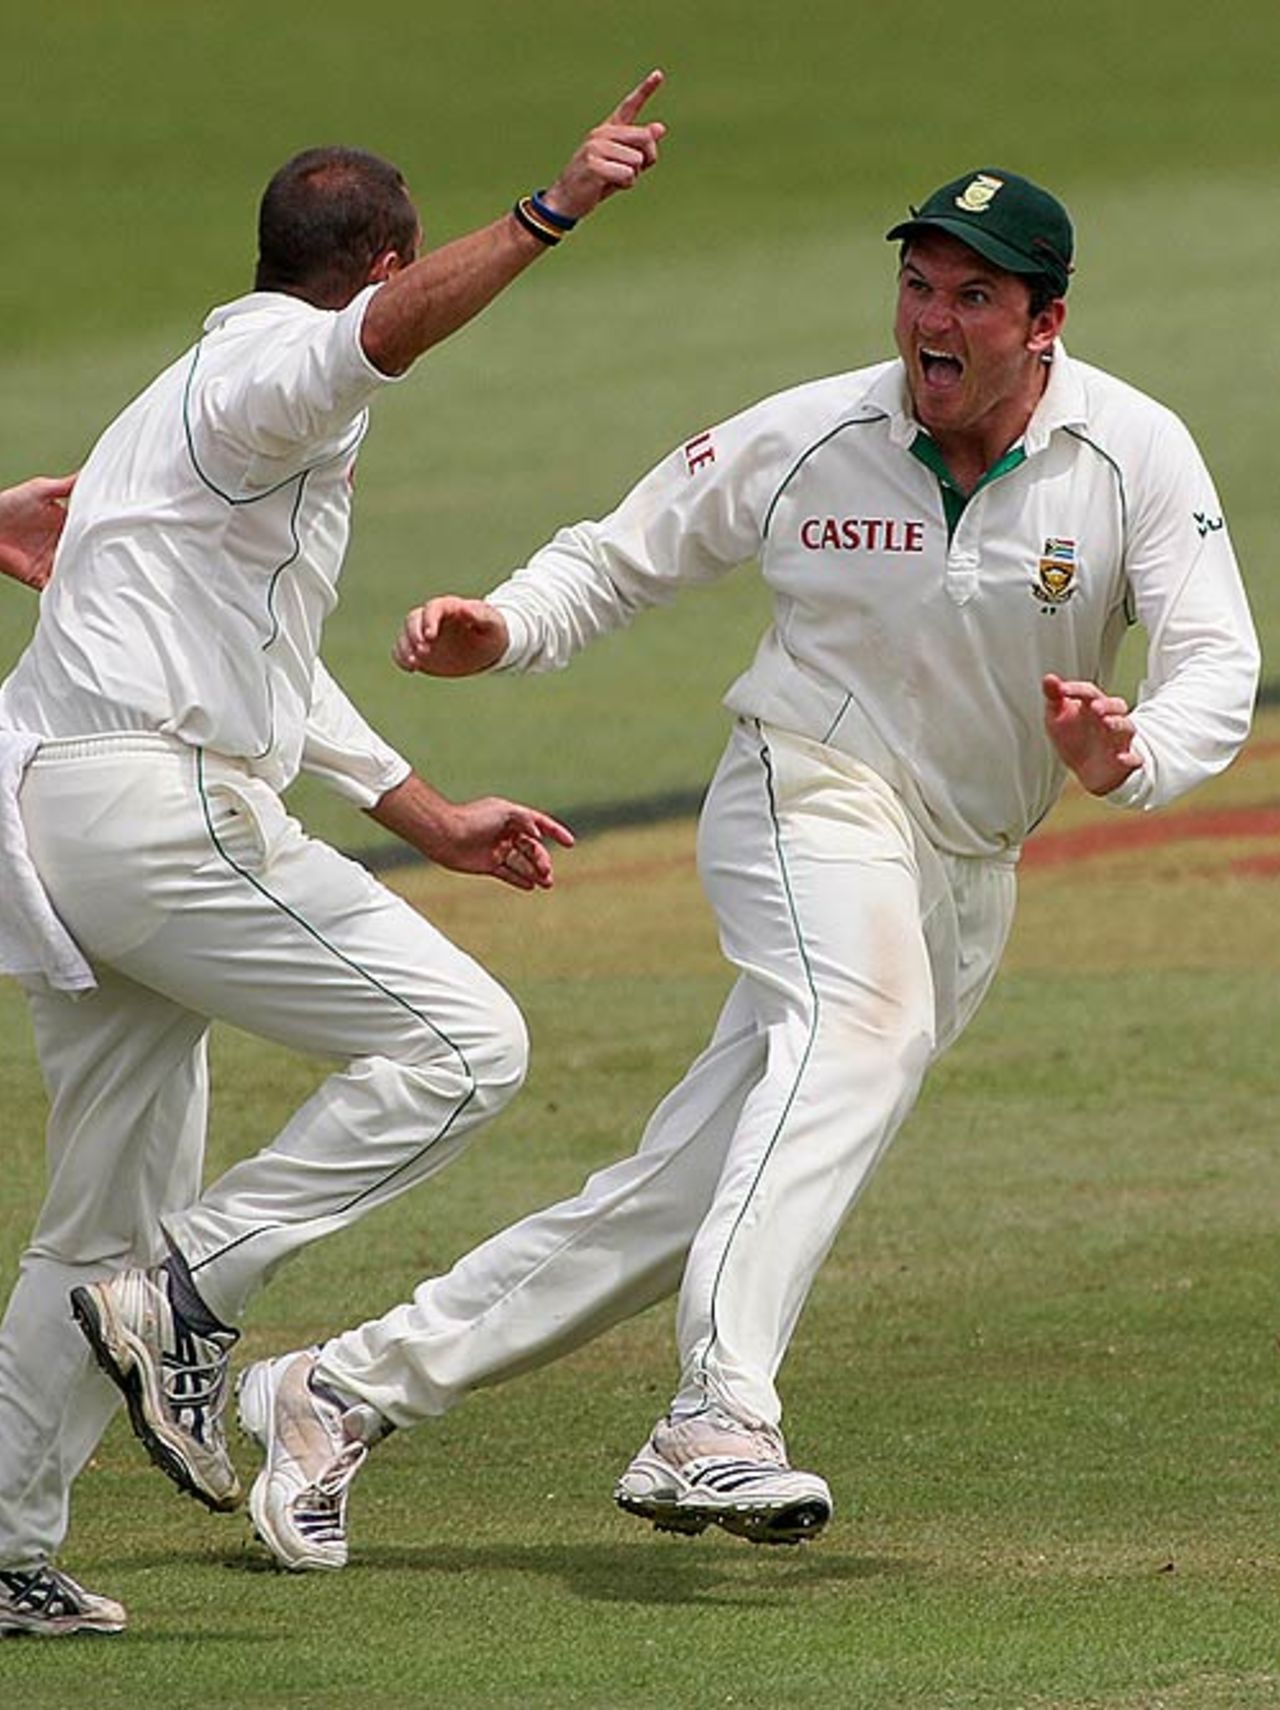 Graeme Smith and Andrew Hall are ecstatic after the dismissal of Anil Kumble, South Africa v India, 2nd Test, Durban, 5th day, December 30, 2006